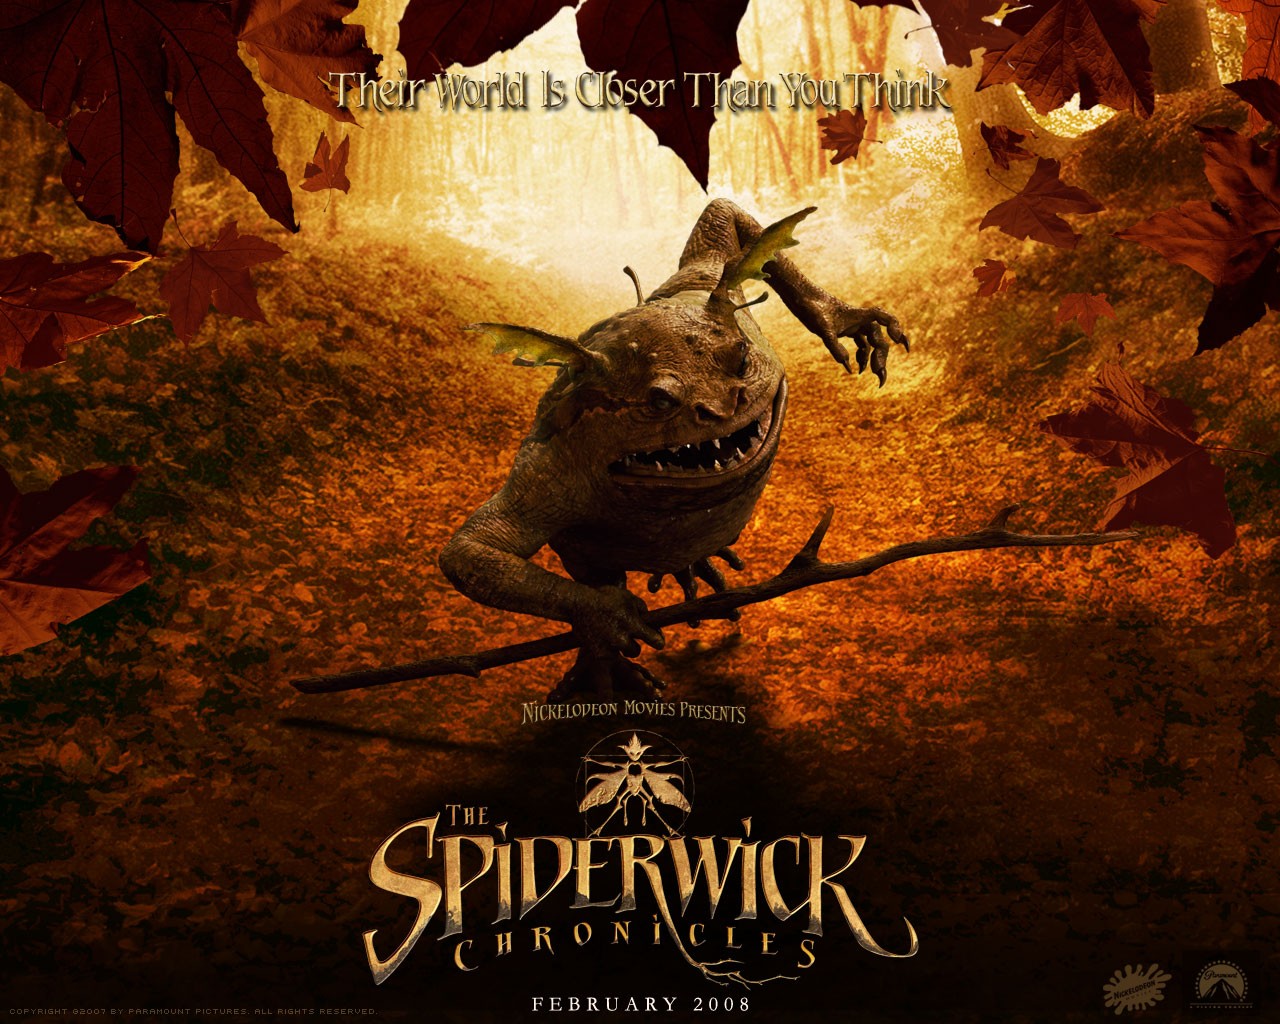 Download full size The Spiderwick Chronicles wallpaper / Movies / 1280x1024